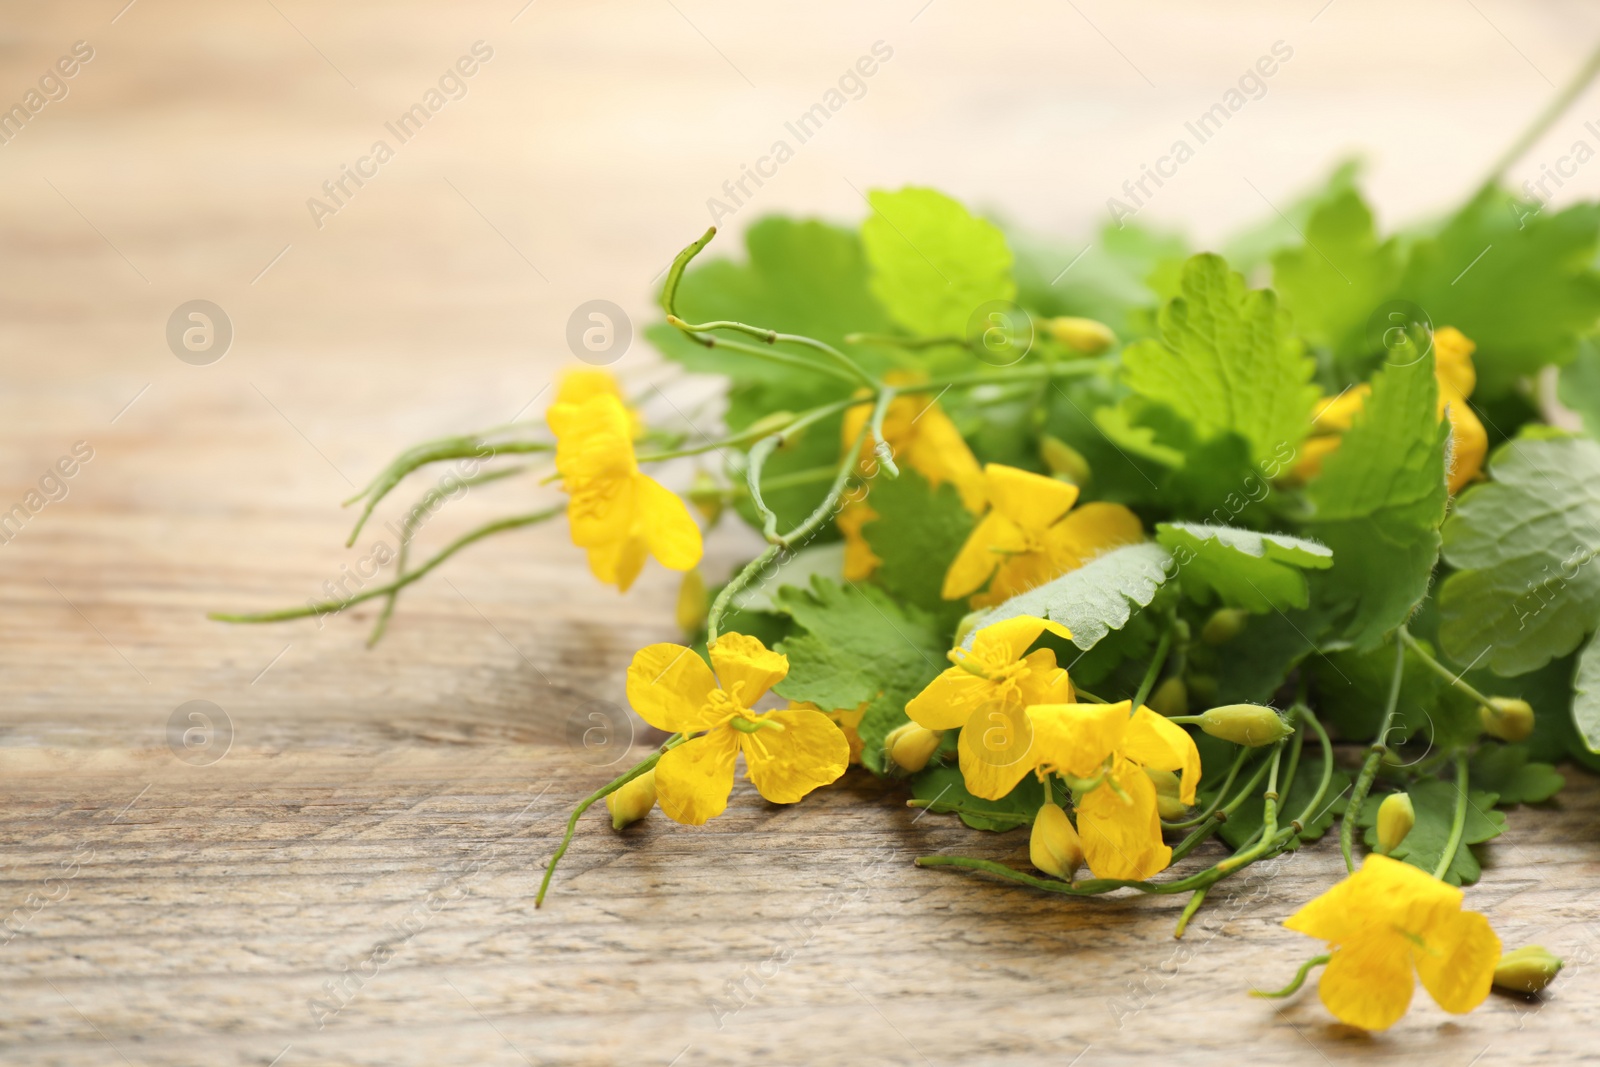 Photo of Celandine with yellow flowers and green leaves on wooden table, closeup